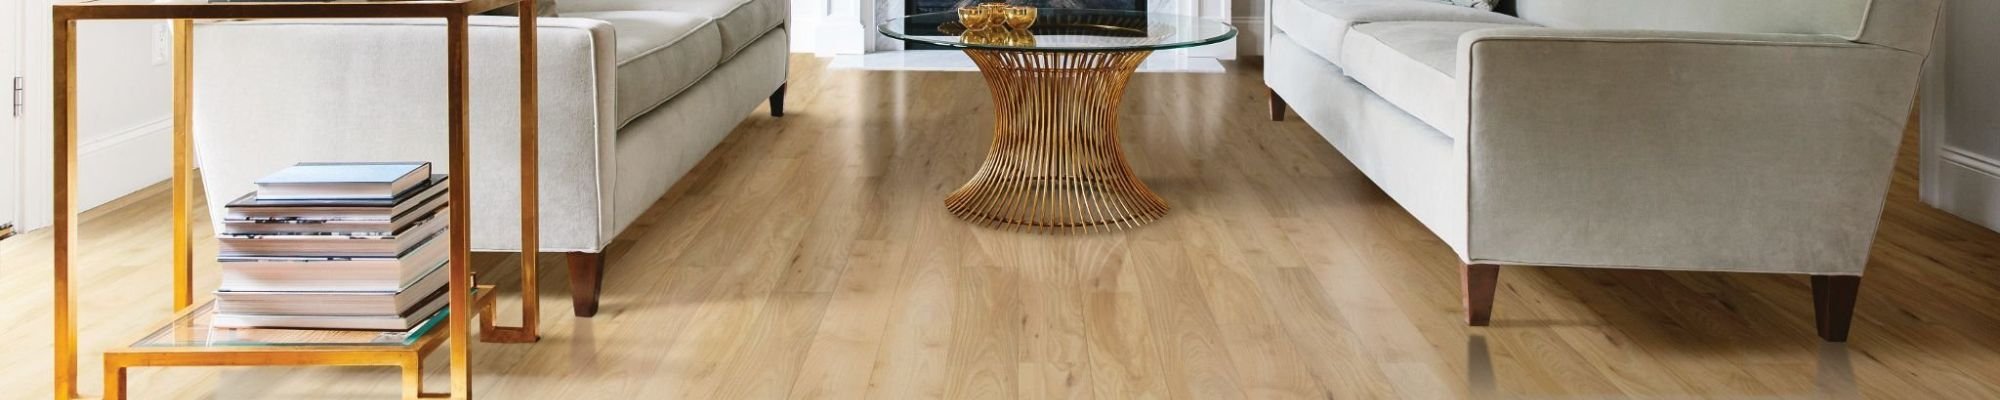 hardwood floor in living space from All American Interior in Fayetteville, NC